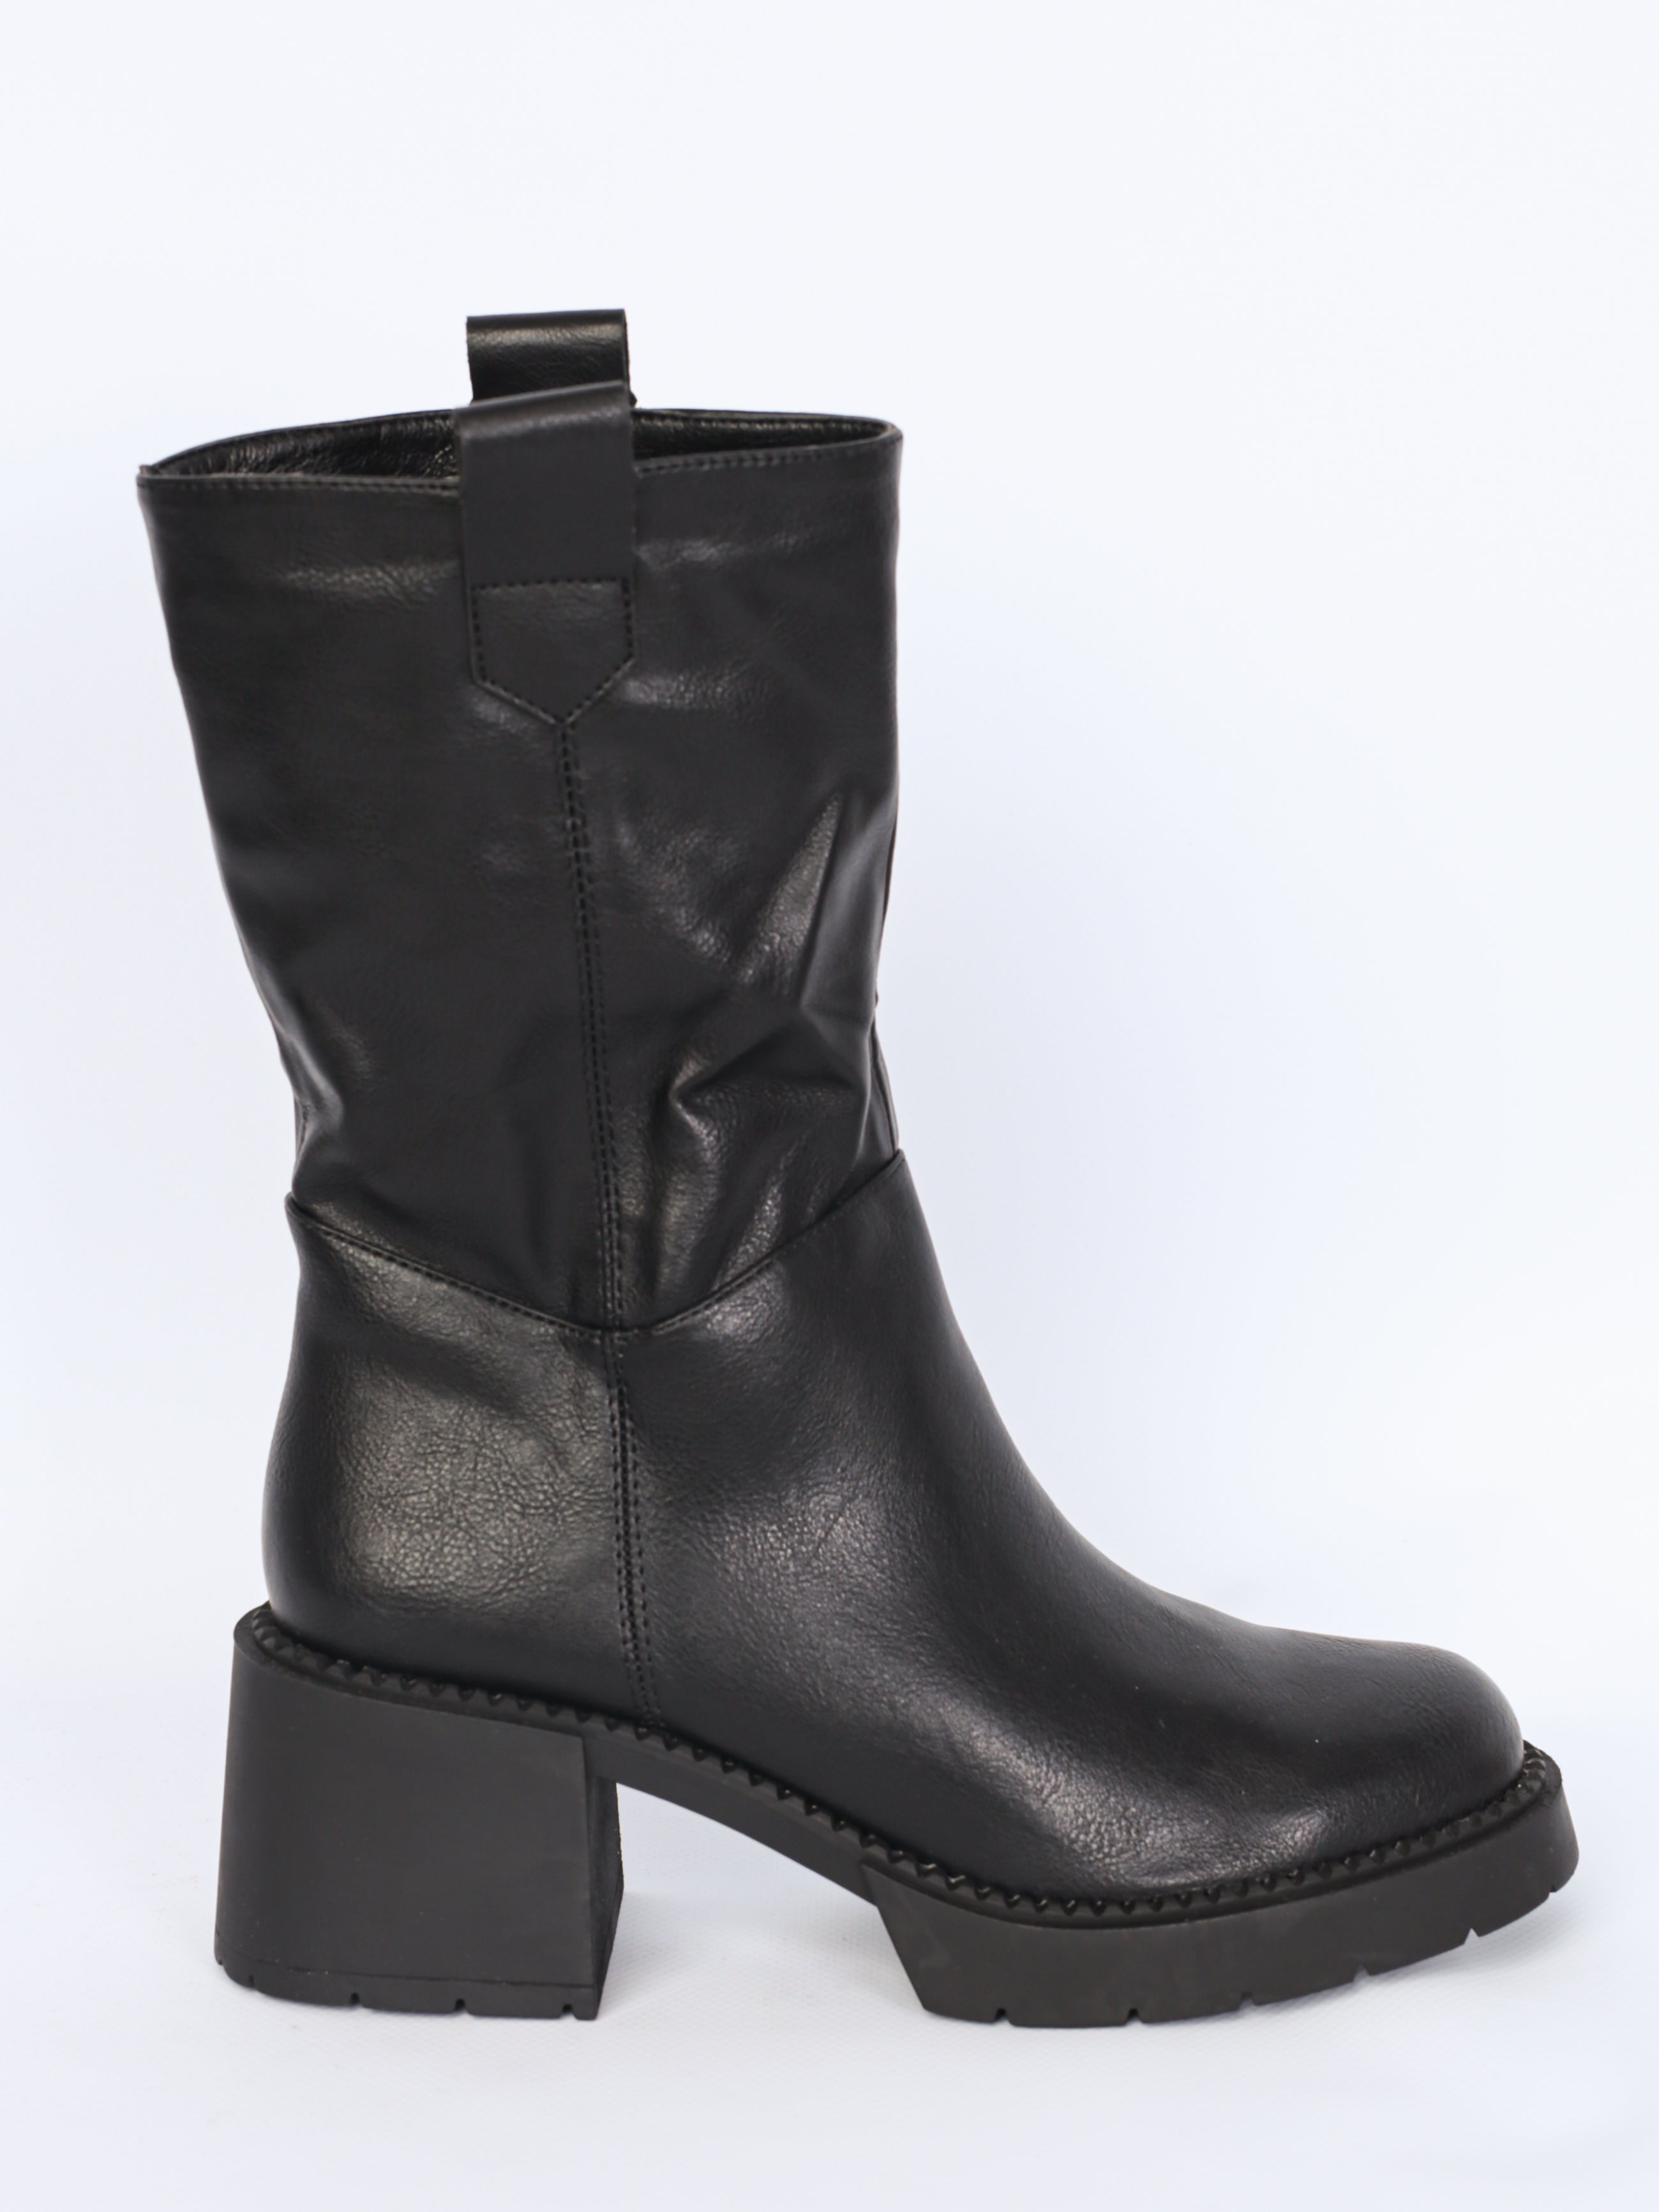 Chunky leather boot with heel